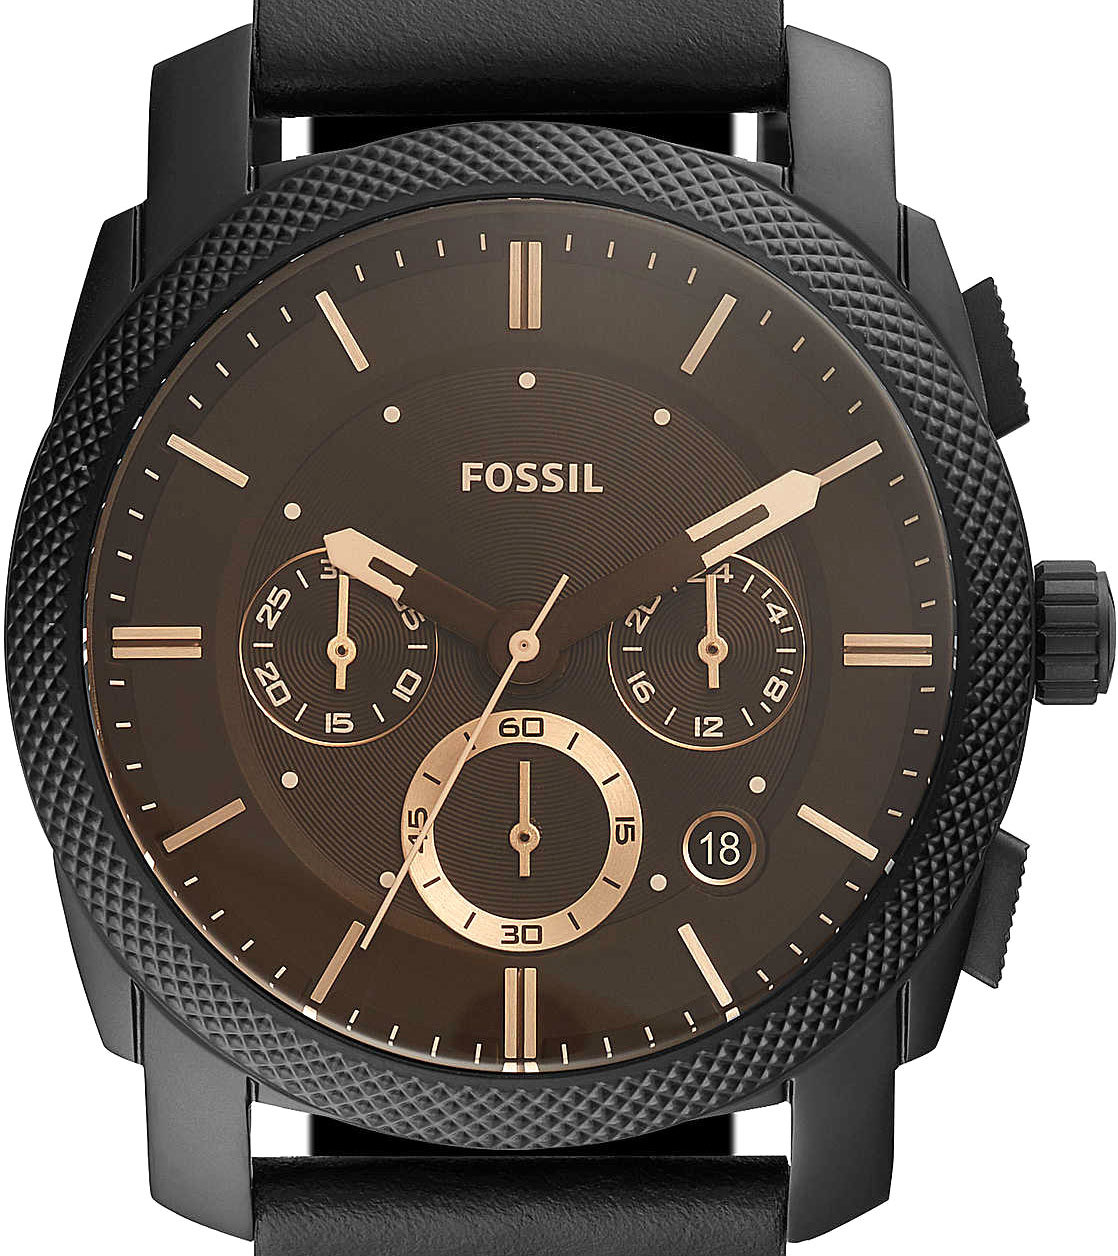 Fossil watches wiki